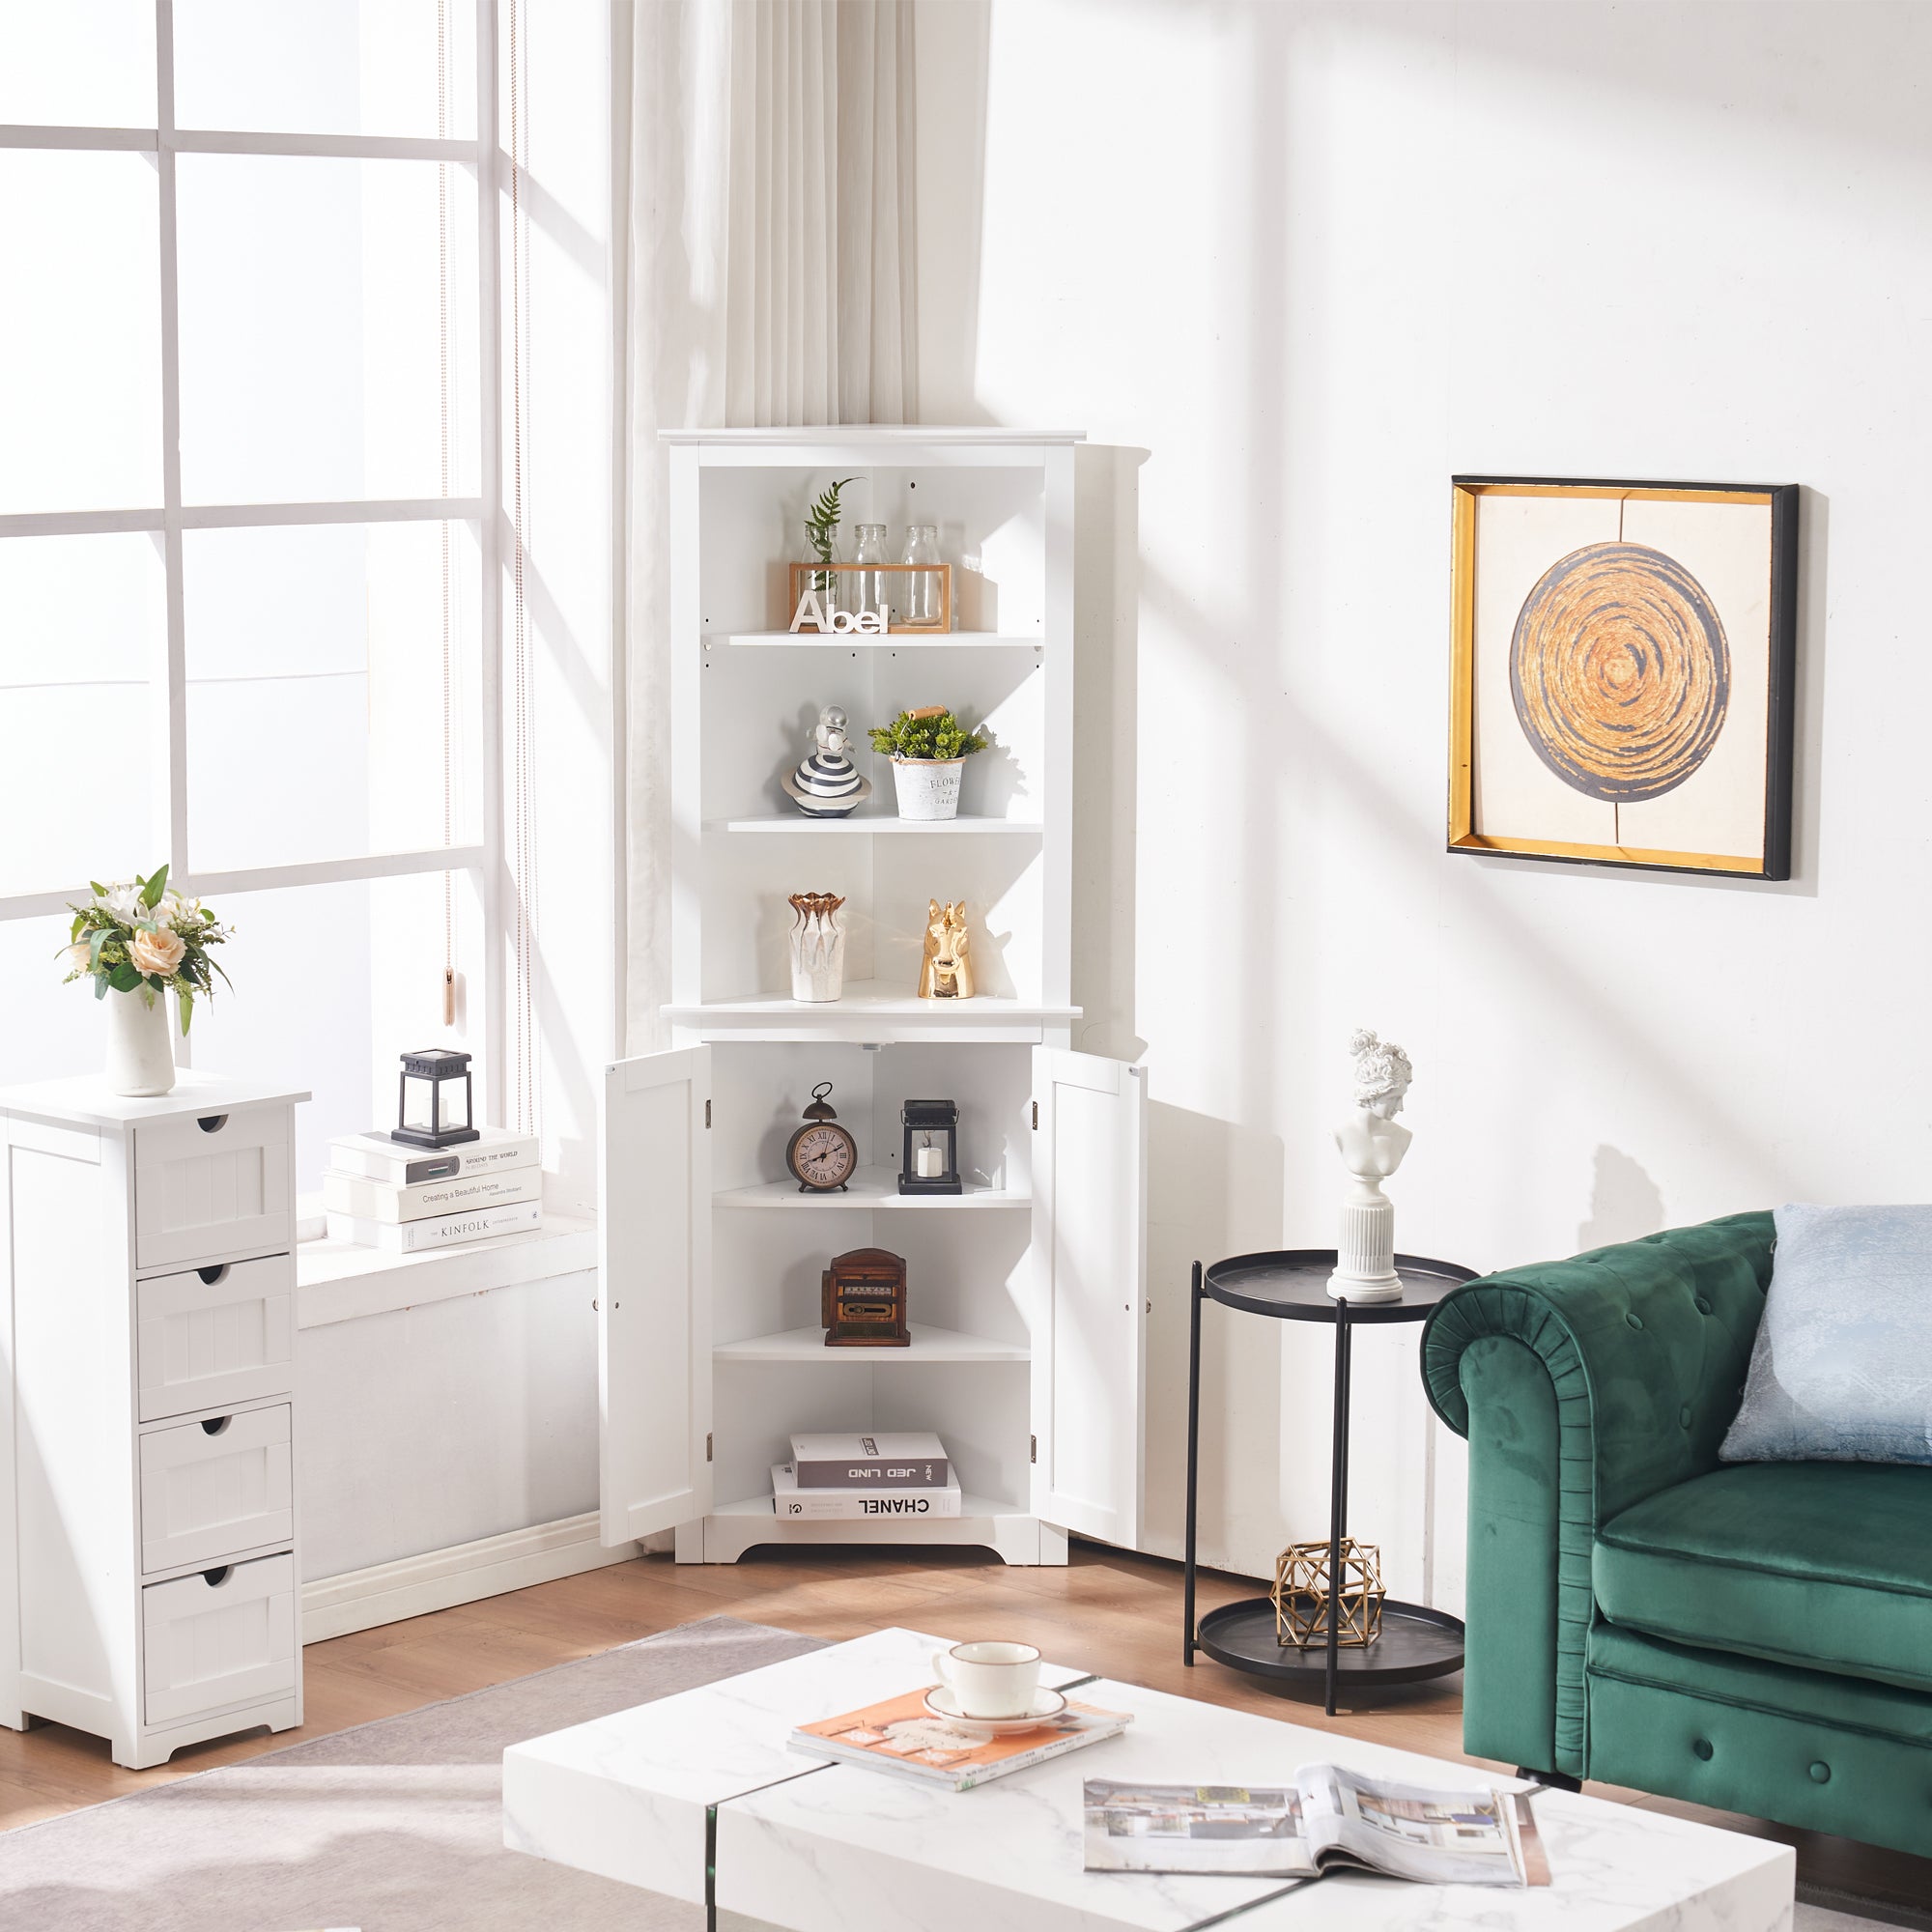 White-A Corner Storage Cabinet for Bathroom, Living Room and